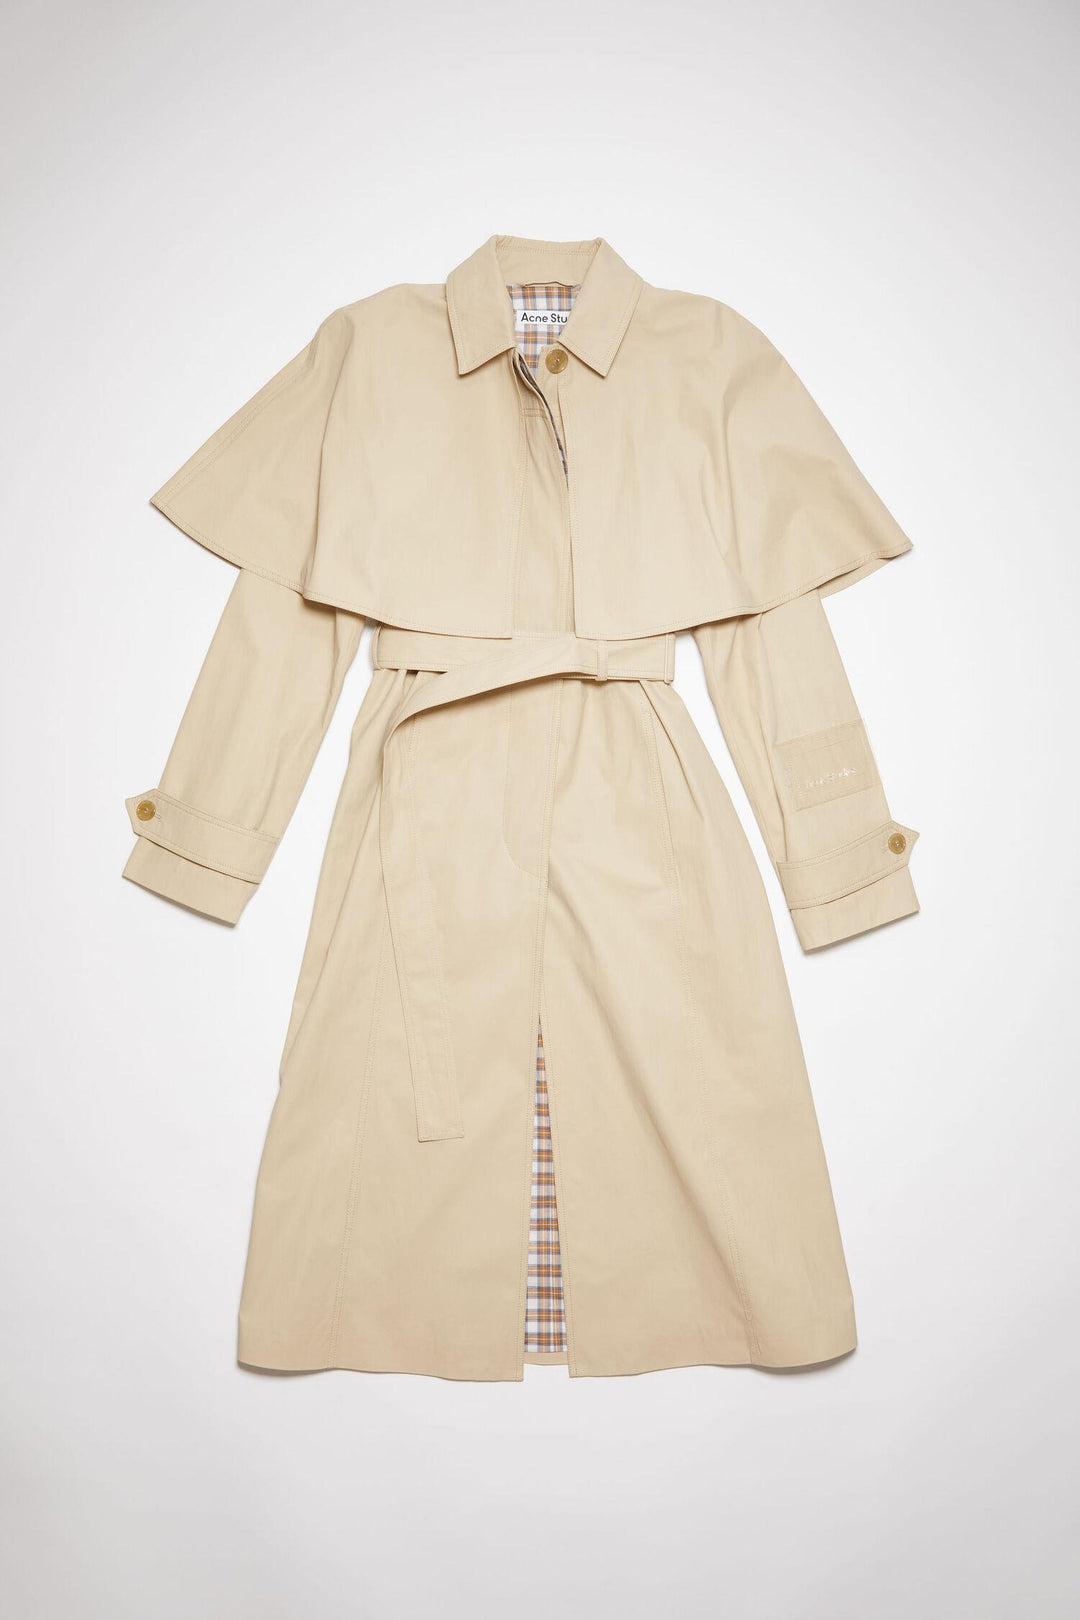 ACNE STUDIOS - Belted Trench Coat - Dale